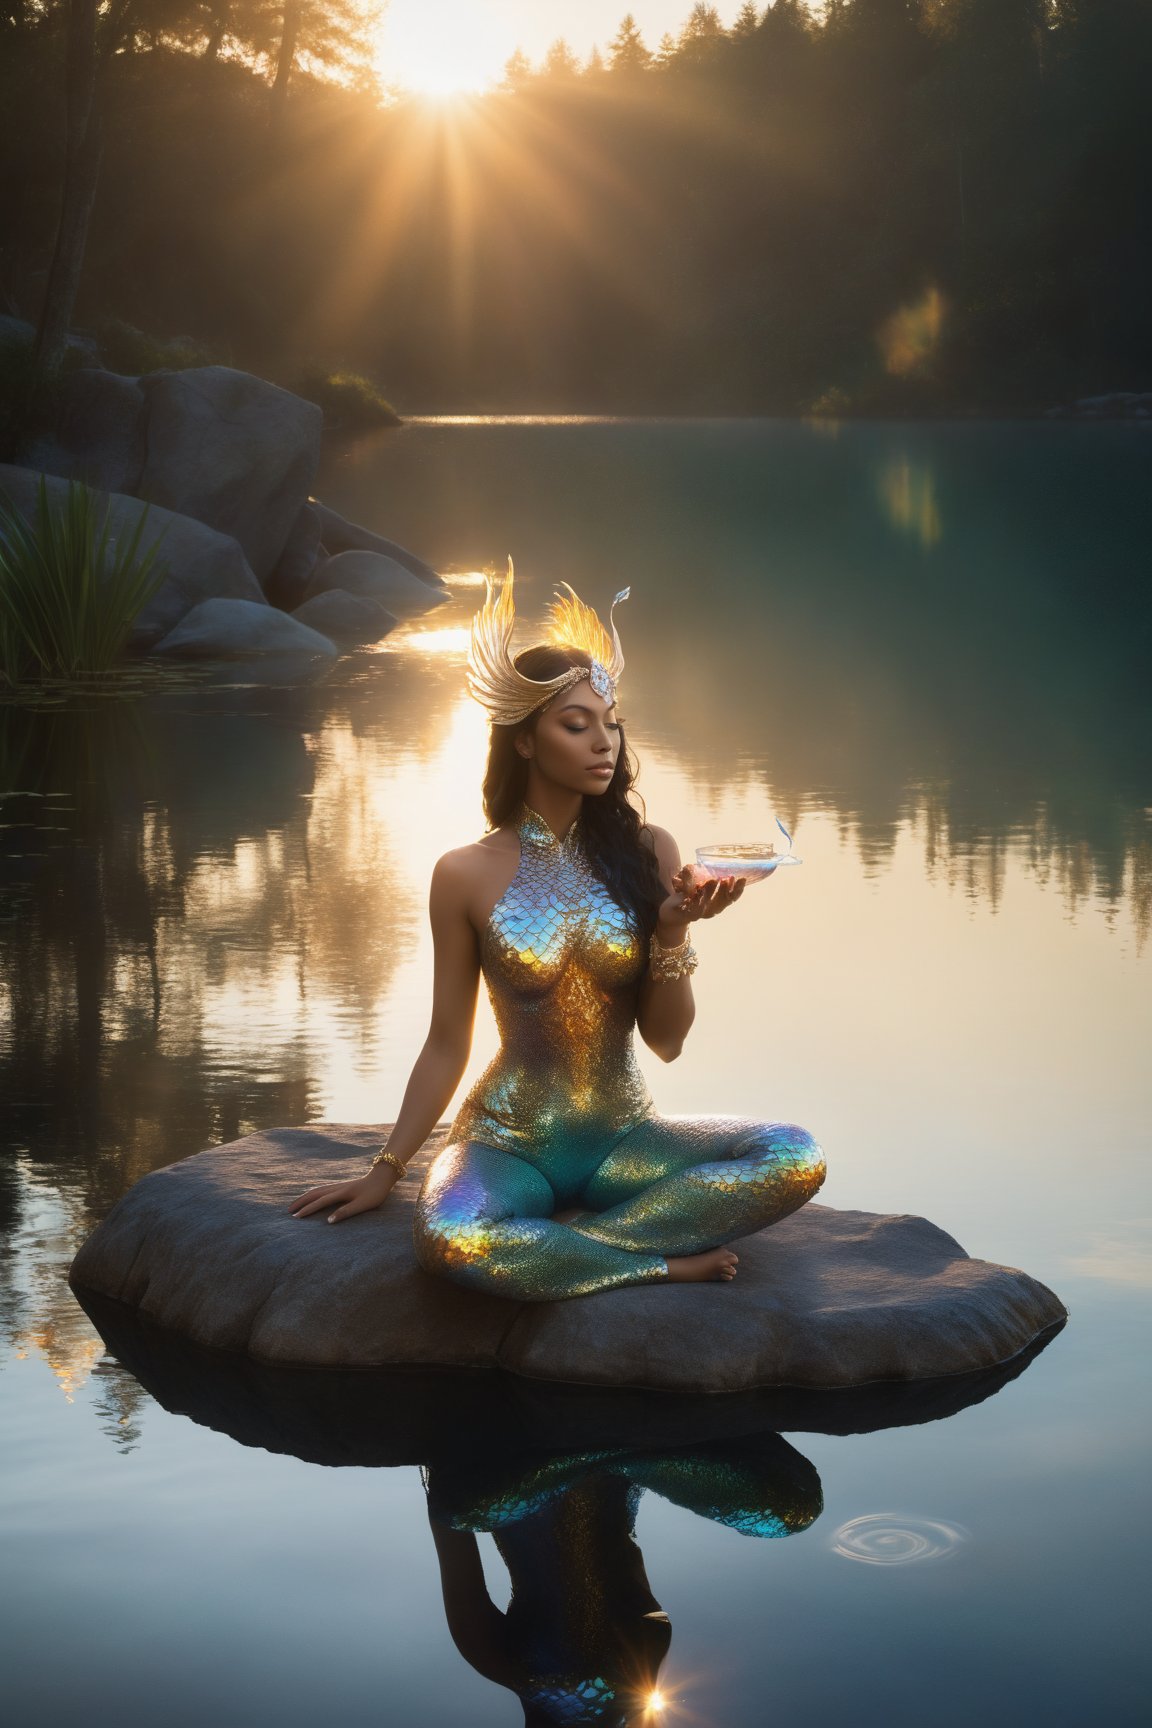 A stunning photograph of a mythical siren-like creature with iridescent skin, enjoying her morning coffee in a serene, tranquil setting. The creature has a long, flowing tail with shimmering scales, and her upper body appears human-like with delicate wings. She sits on a rock by a crystal-clear lake, her morning brew steaming gently in a porcelain cup. The sun rises over the horizon, casting a warm golden light on her and reflecting off the still waters., photoshop (medium)